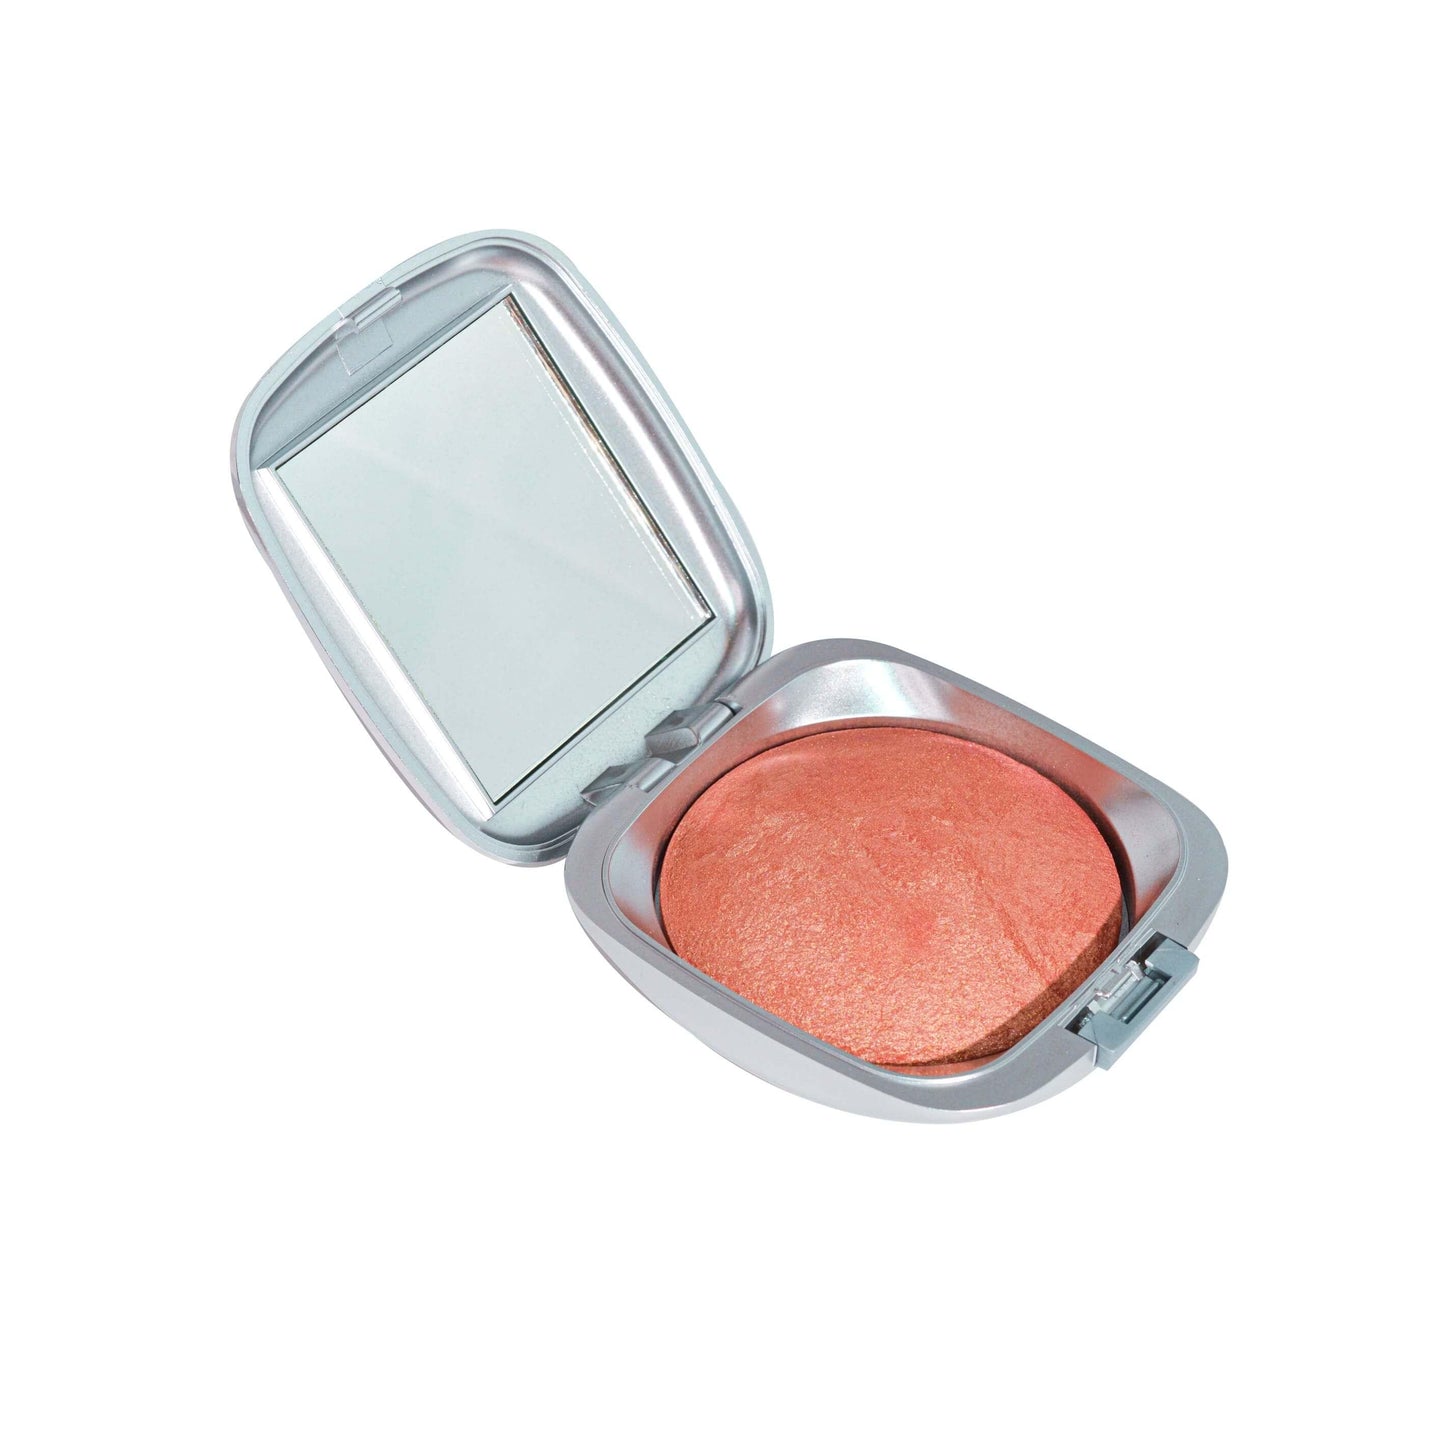 Mineral Baked Blush - Apricot swirl shade - Alluring Minerals